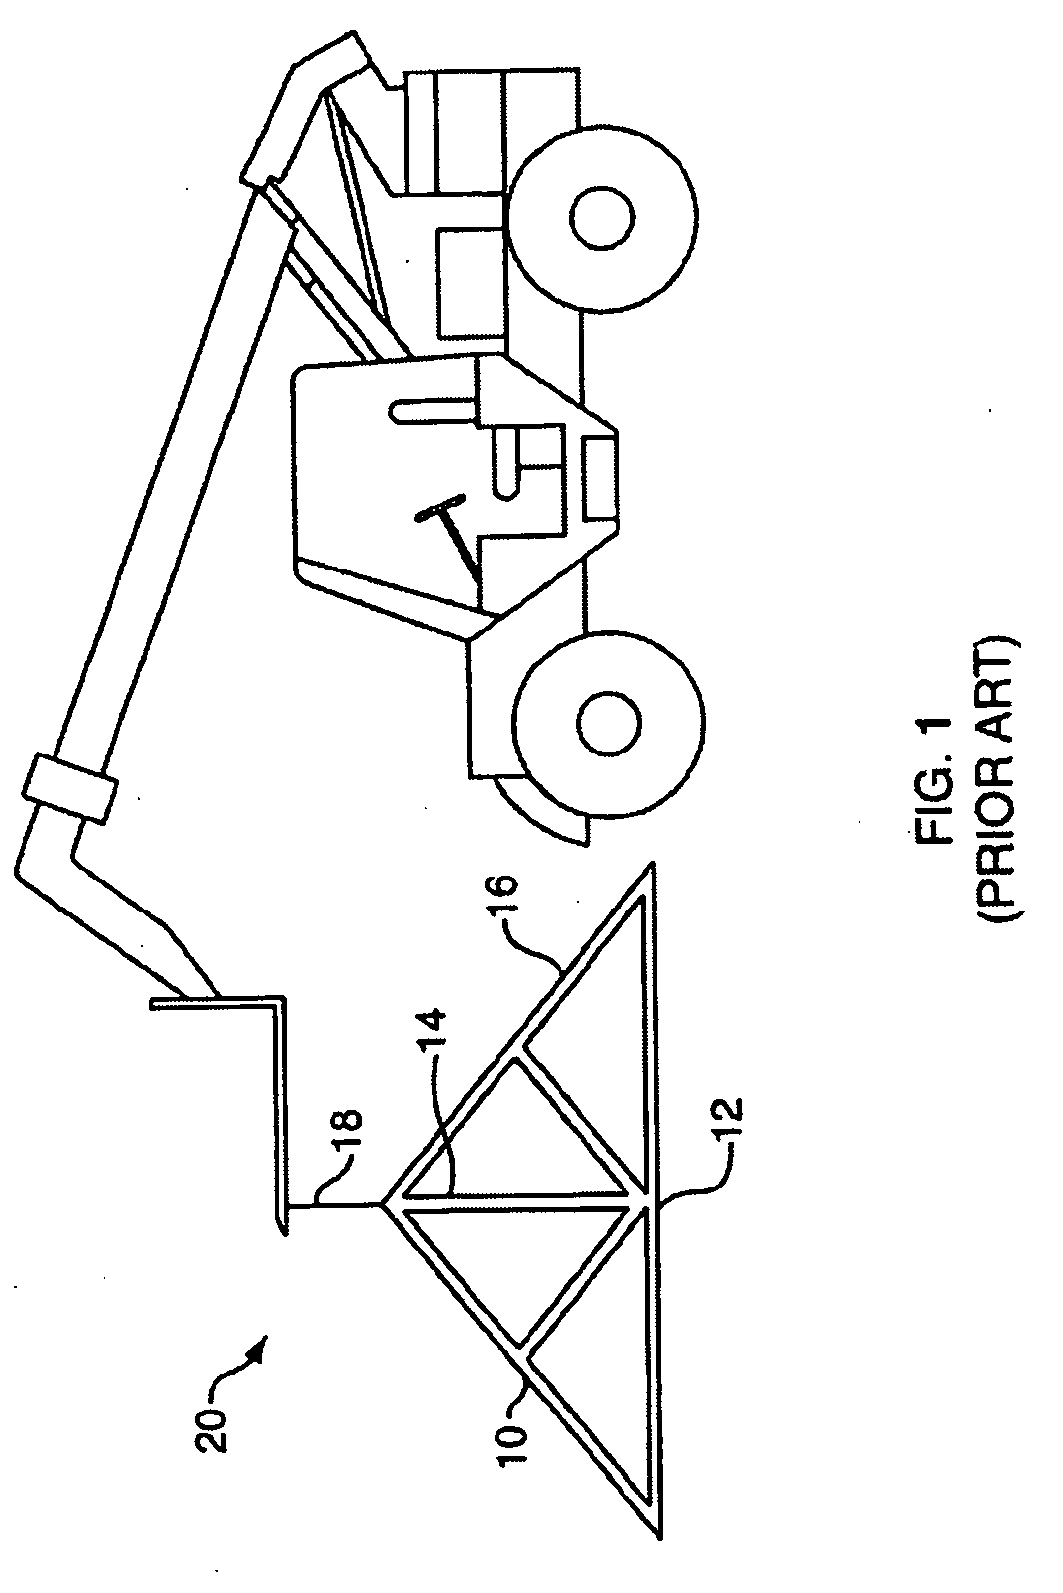 System for transporting and installing roof trusses